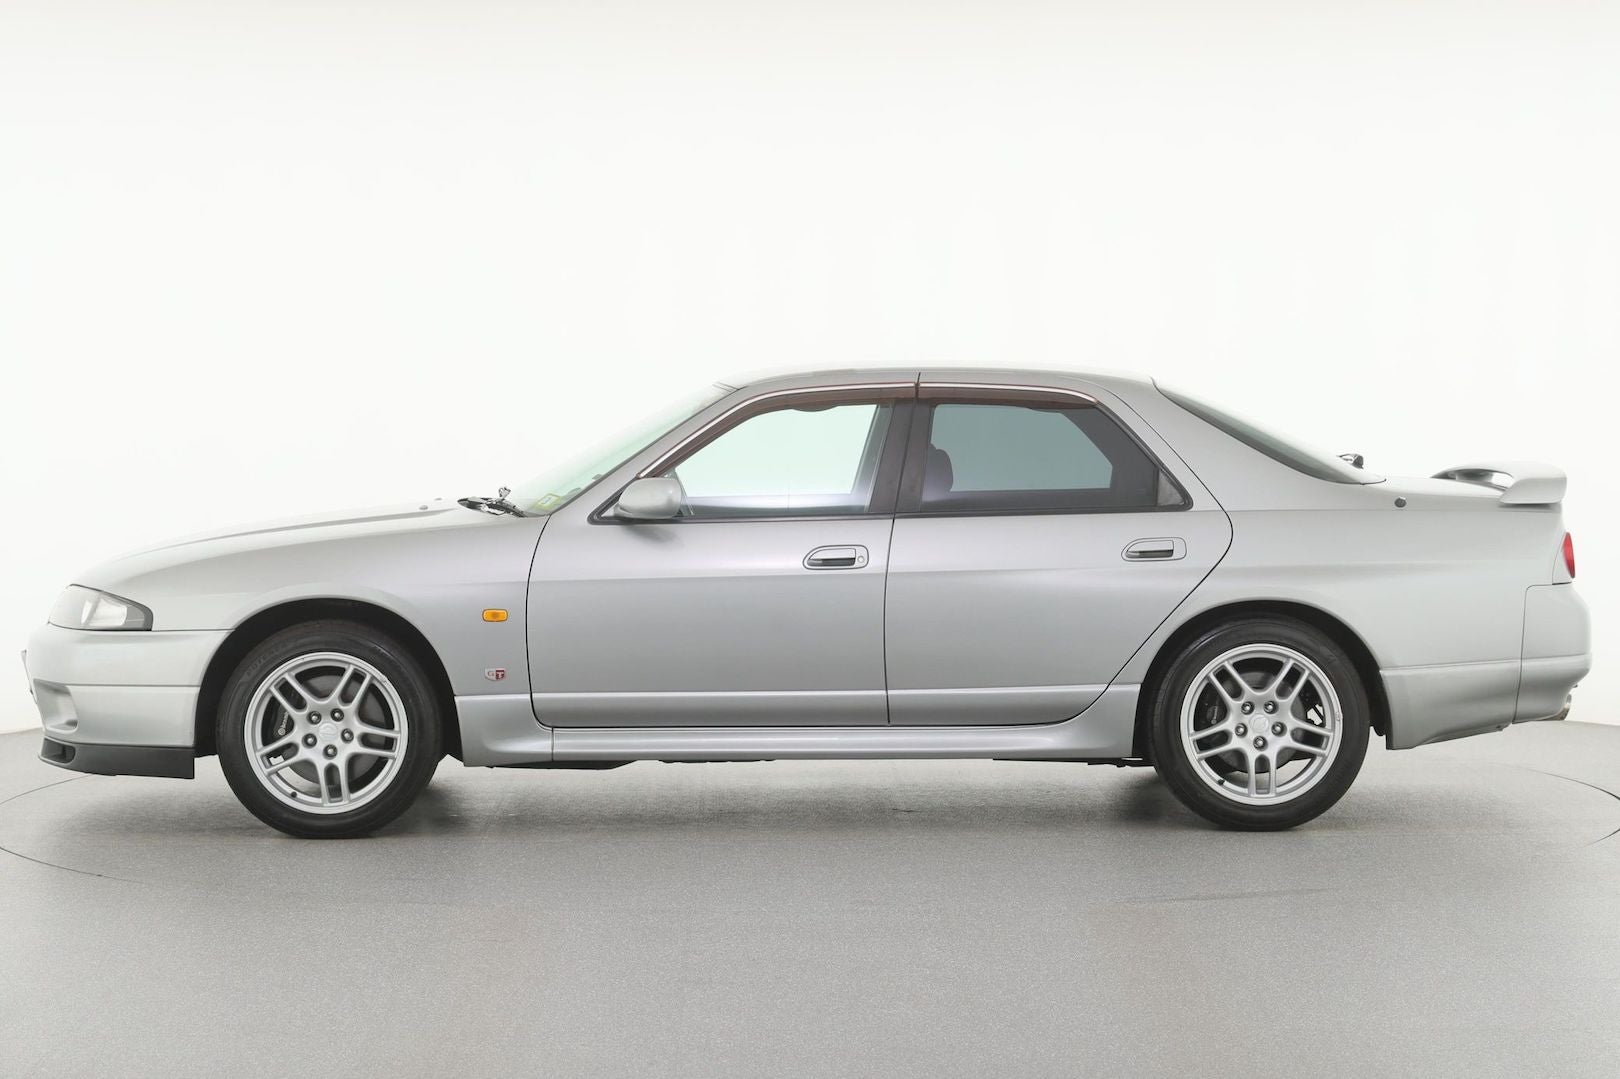 A Rare Factory Nissan Skyline GT-R Sedan Is For Sale in the US